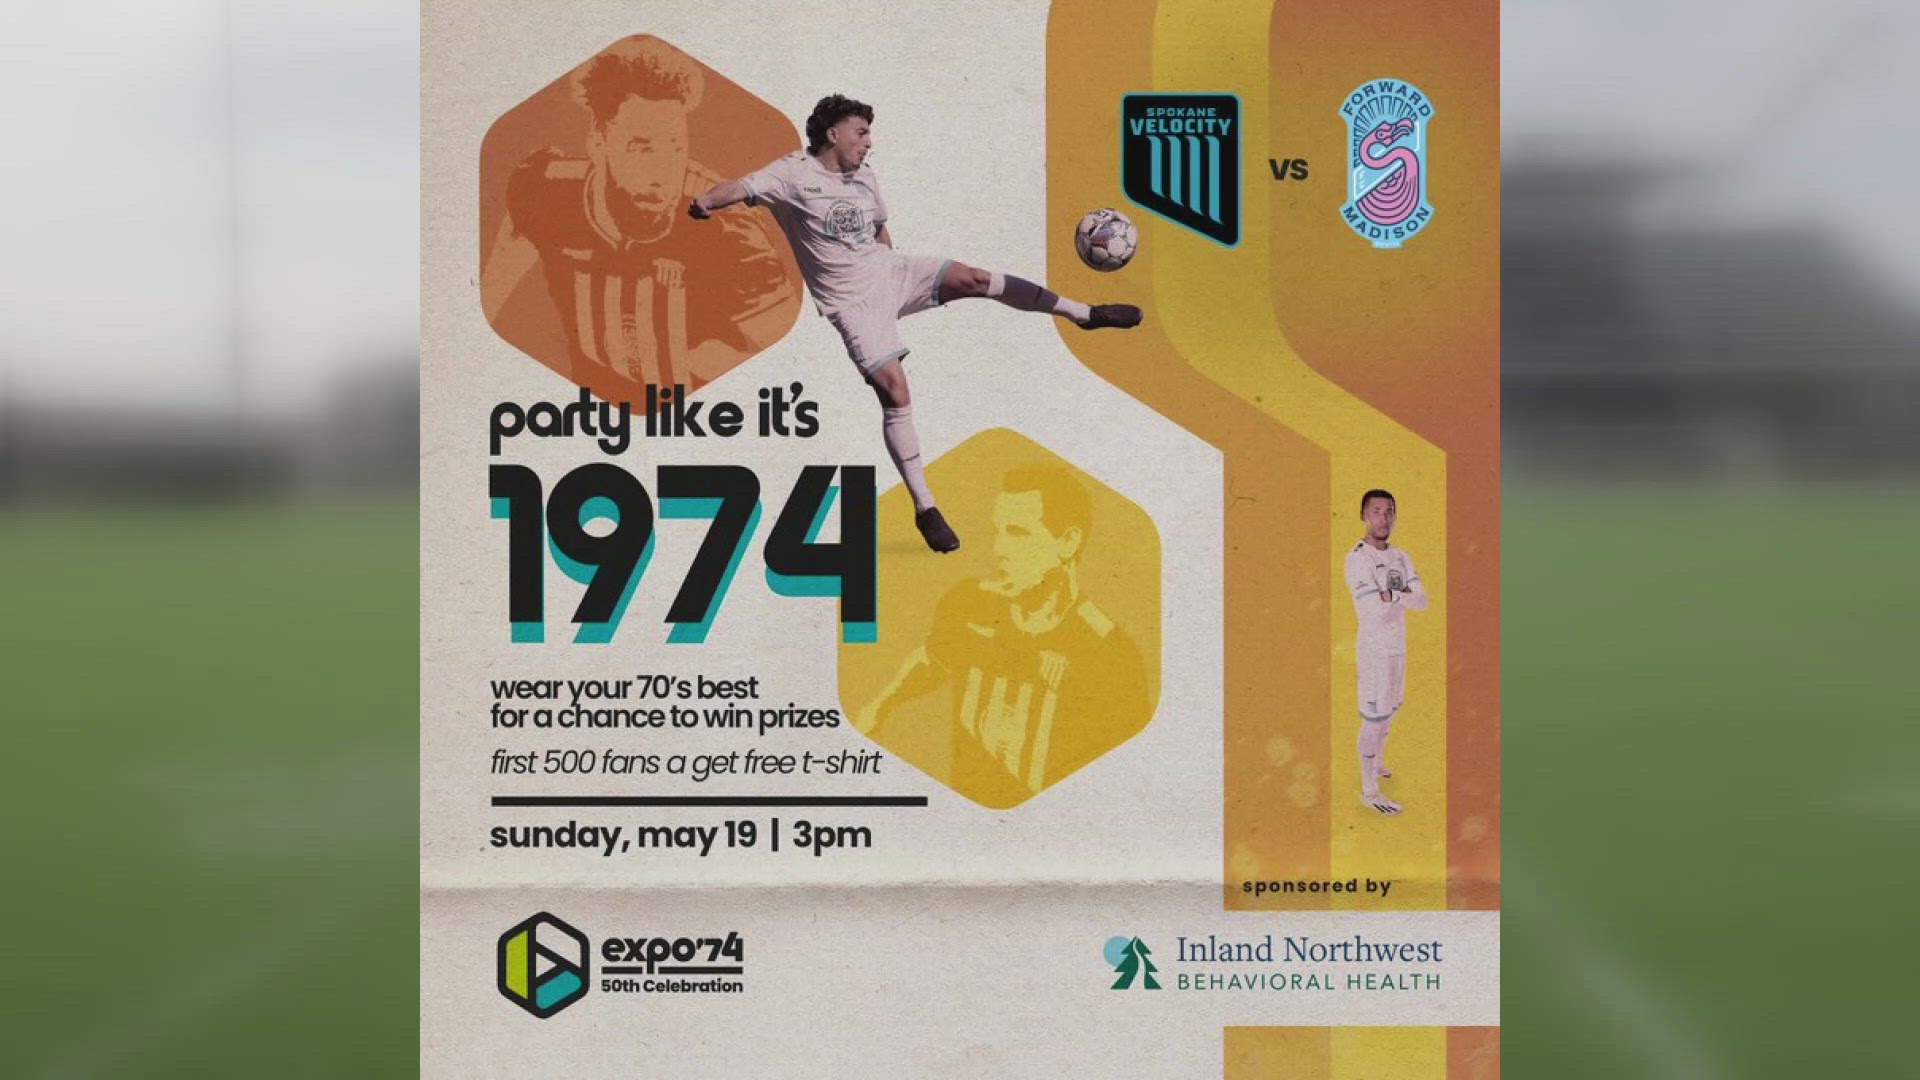 The Velocity will host Forward Madison FC on May 19 and the team is urging fans in attendance to wear their best 70’s costumes!